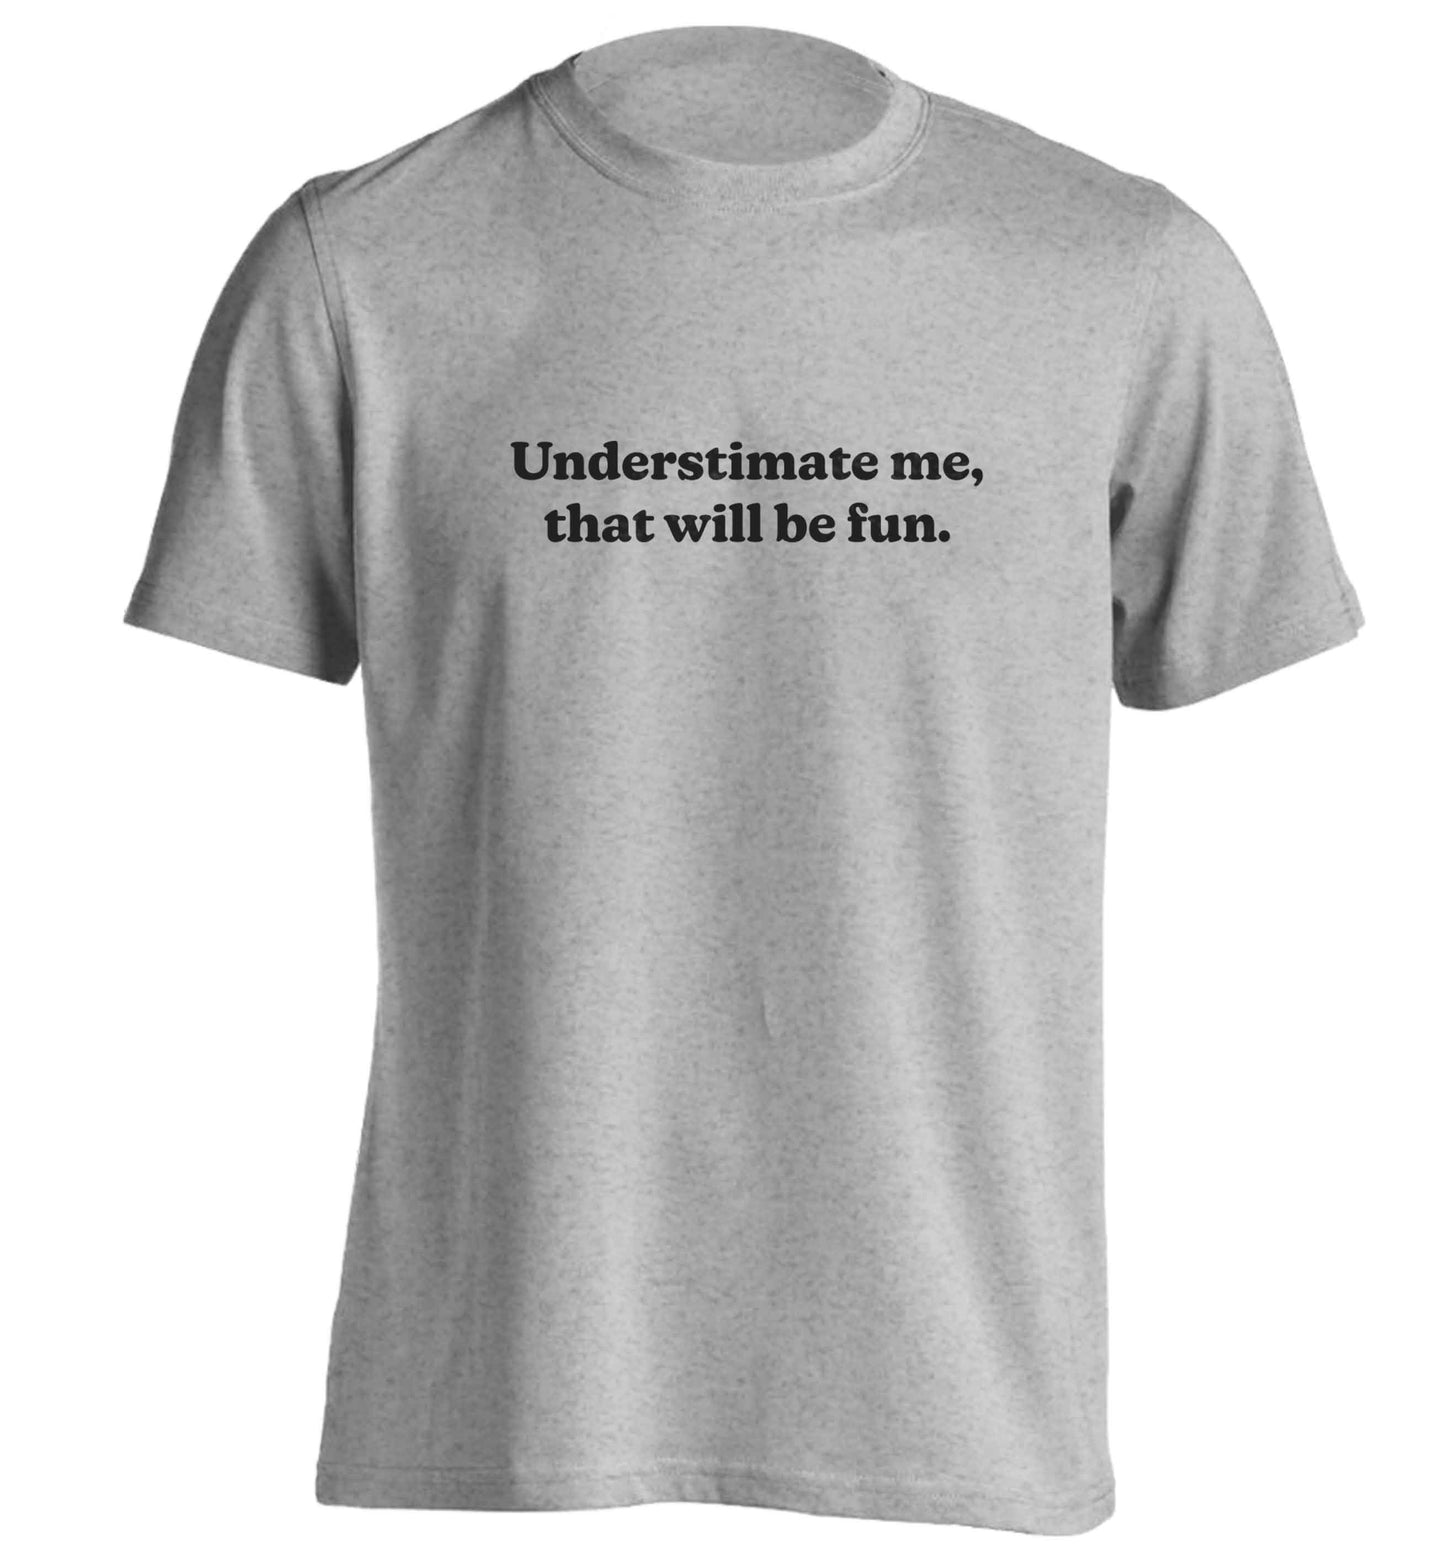 Underestimate me that will be fun adults unisex grey Tshirt 2XL